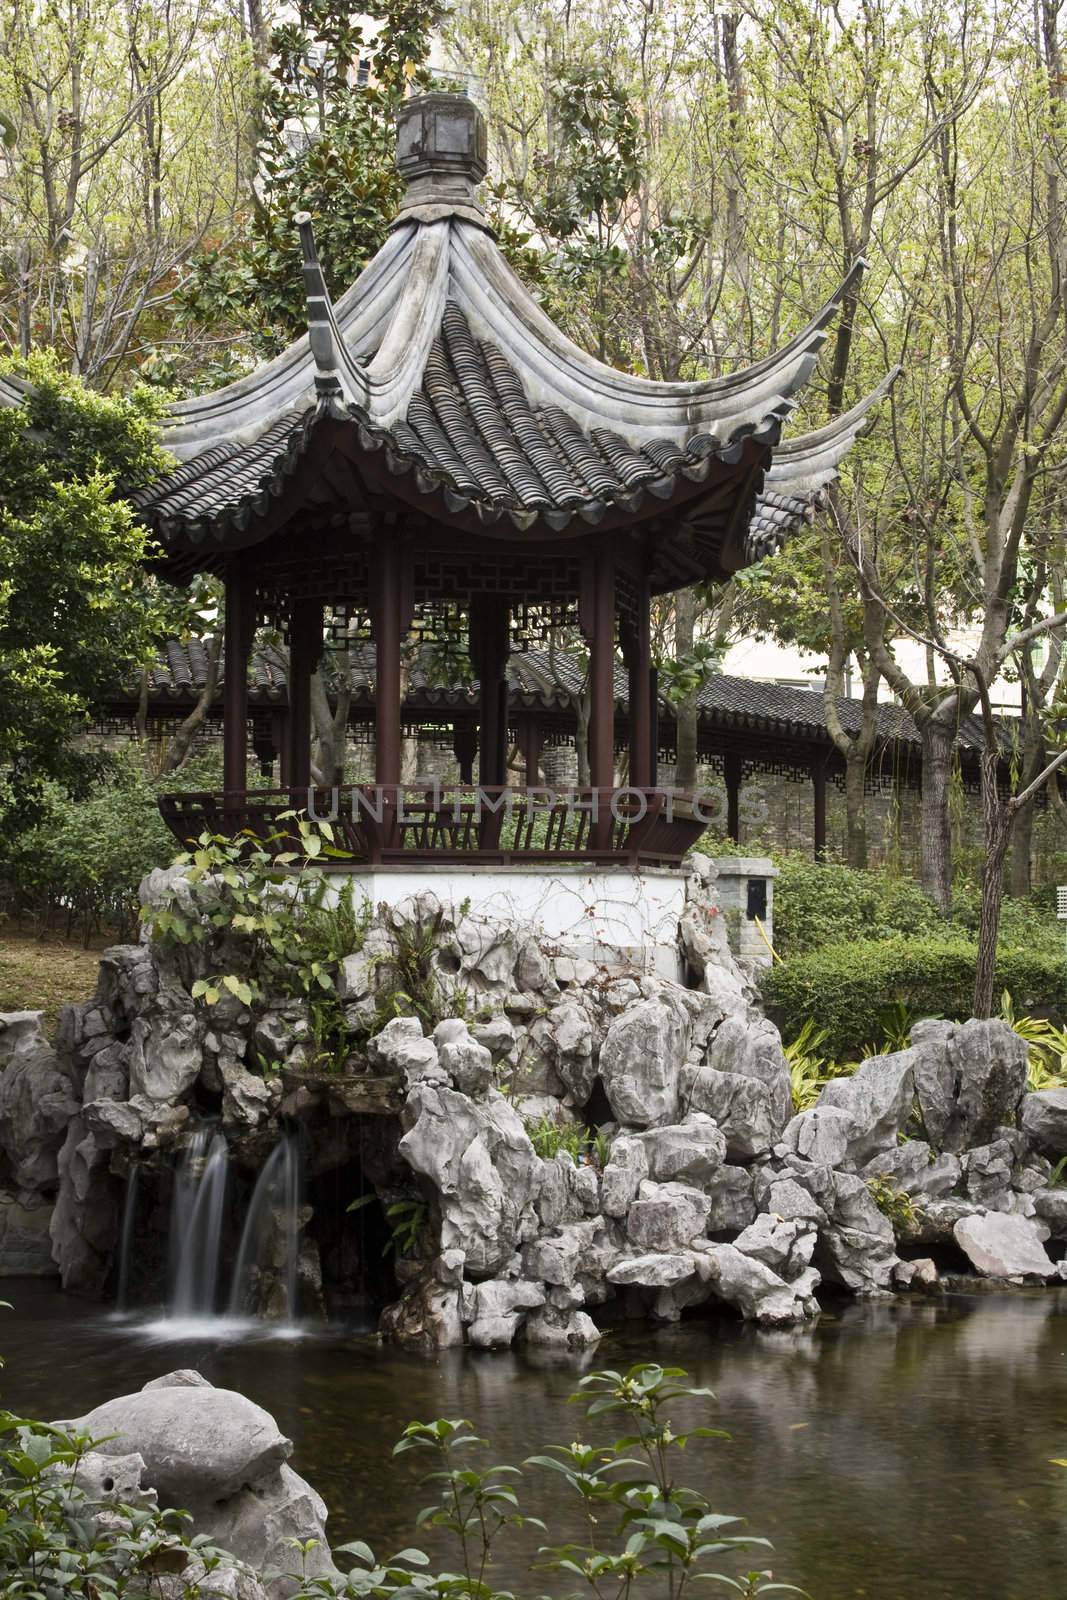 A typical Chinese garden with a pond.